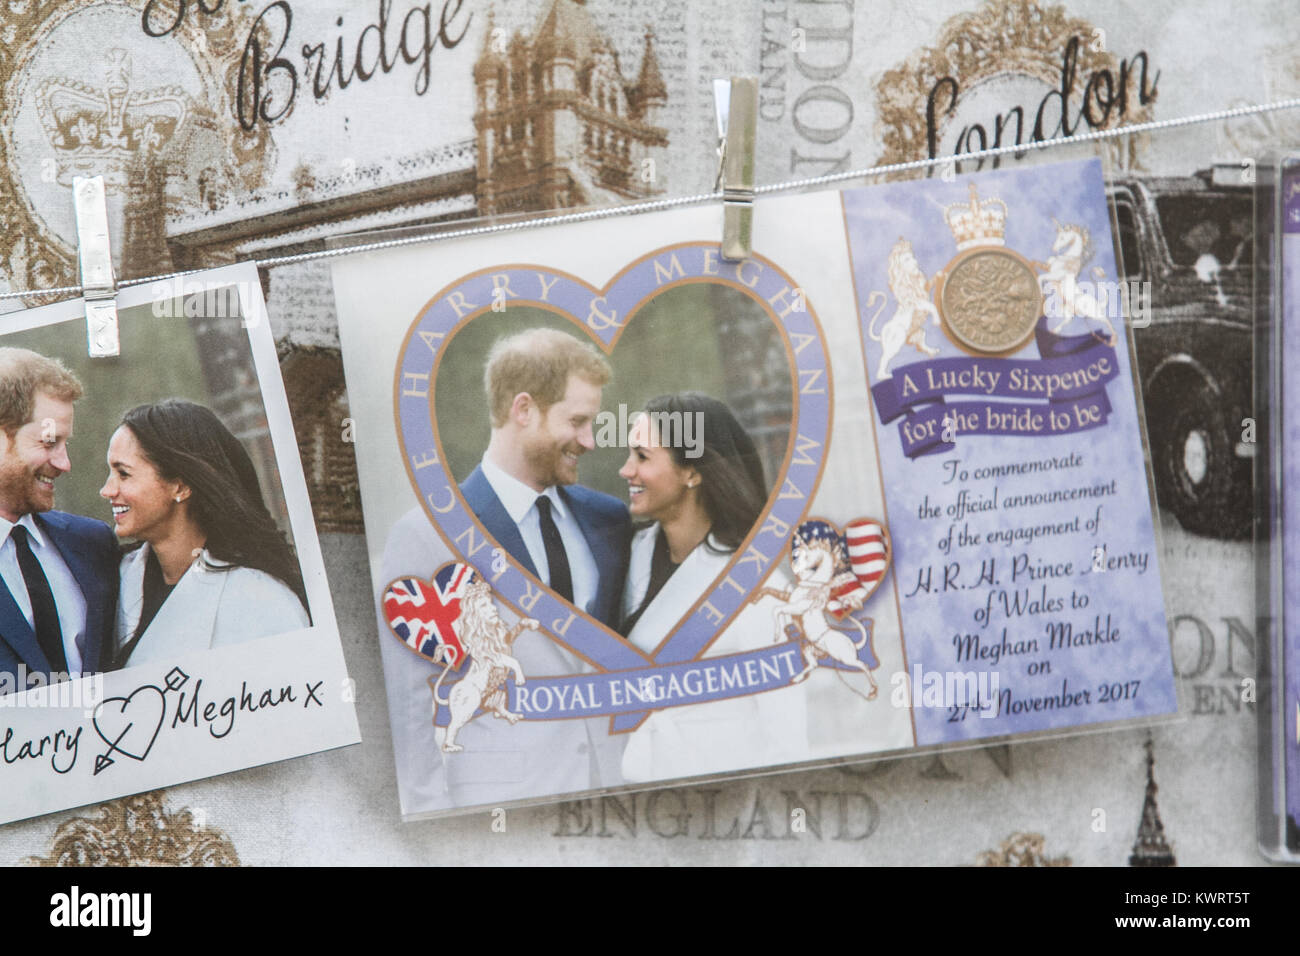 Windsor Berkshire, UK. 5th Jan, 2017. Pictures of Prince Harry and his fiancee Meghan Markle are sold by souvenir shops in Windsor hoping to capitalise on the Royal Wedding on 19th May 2018 Credit: amer ghazzal/Alamy Live News Stock Photo